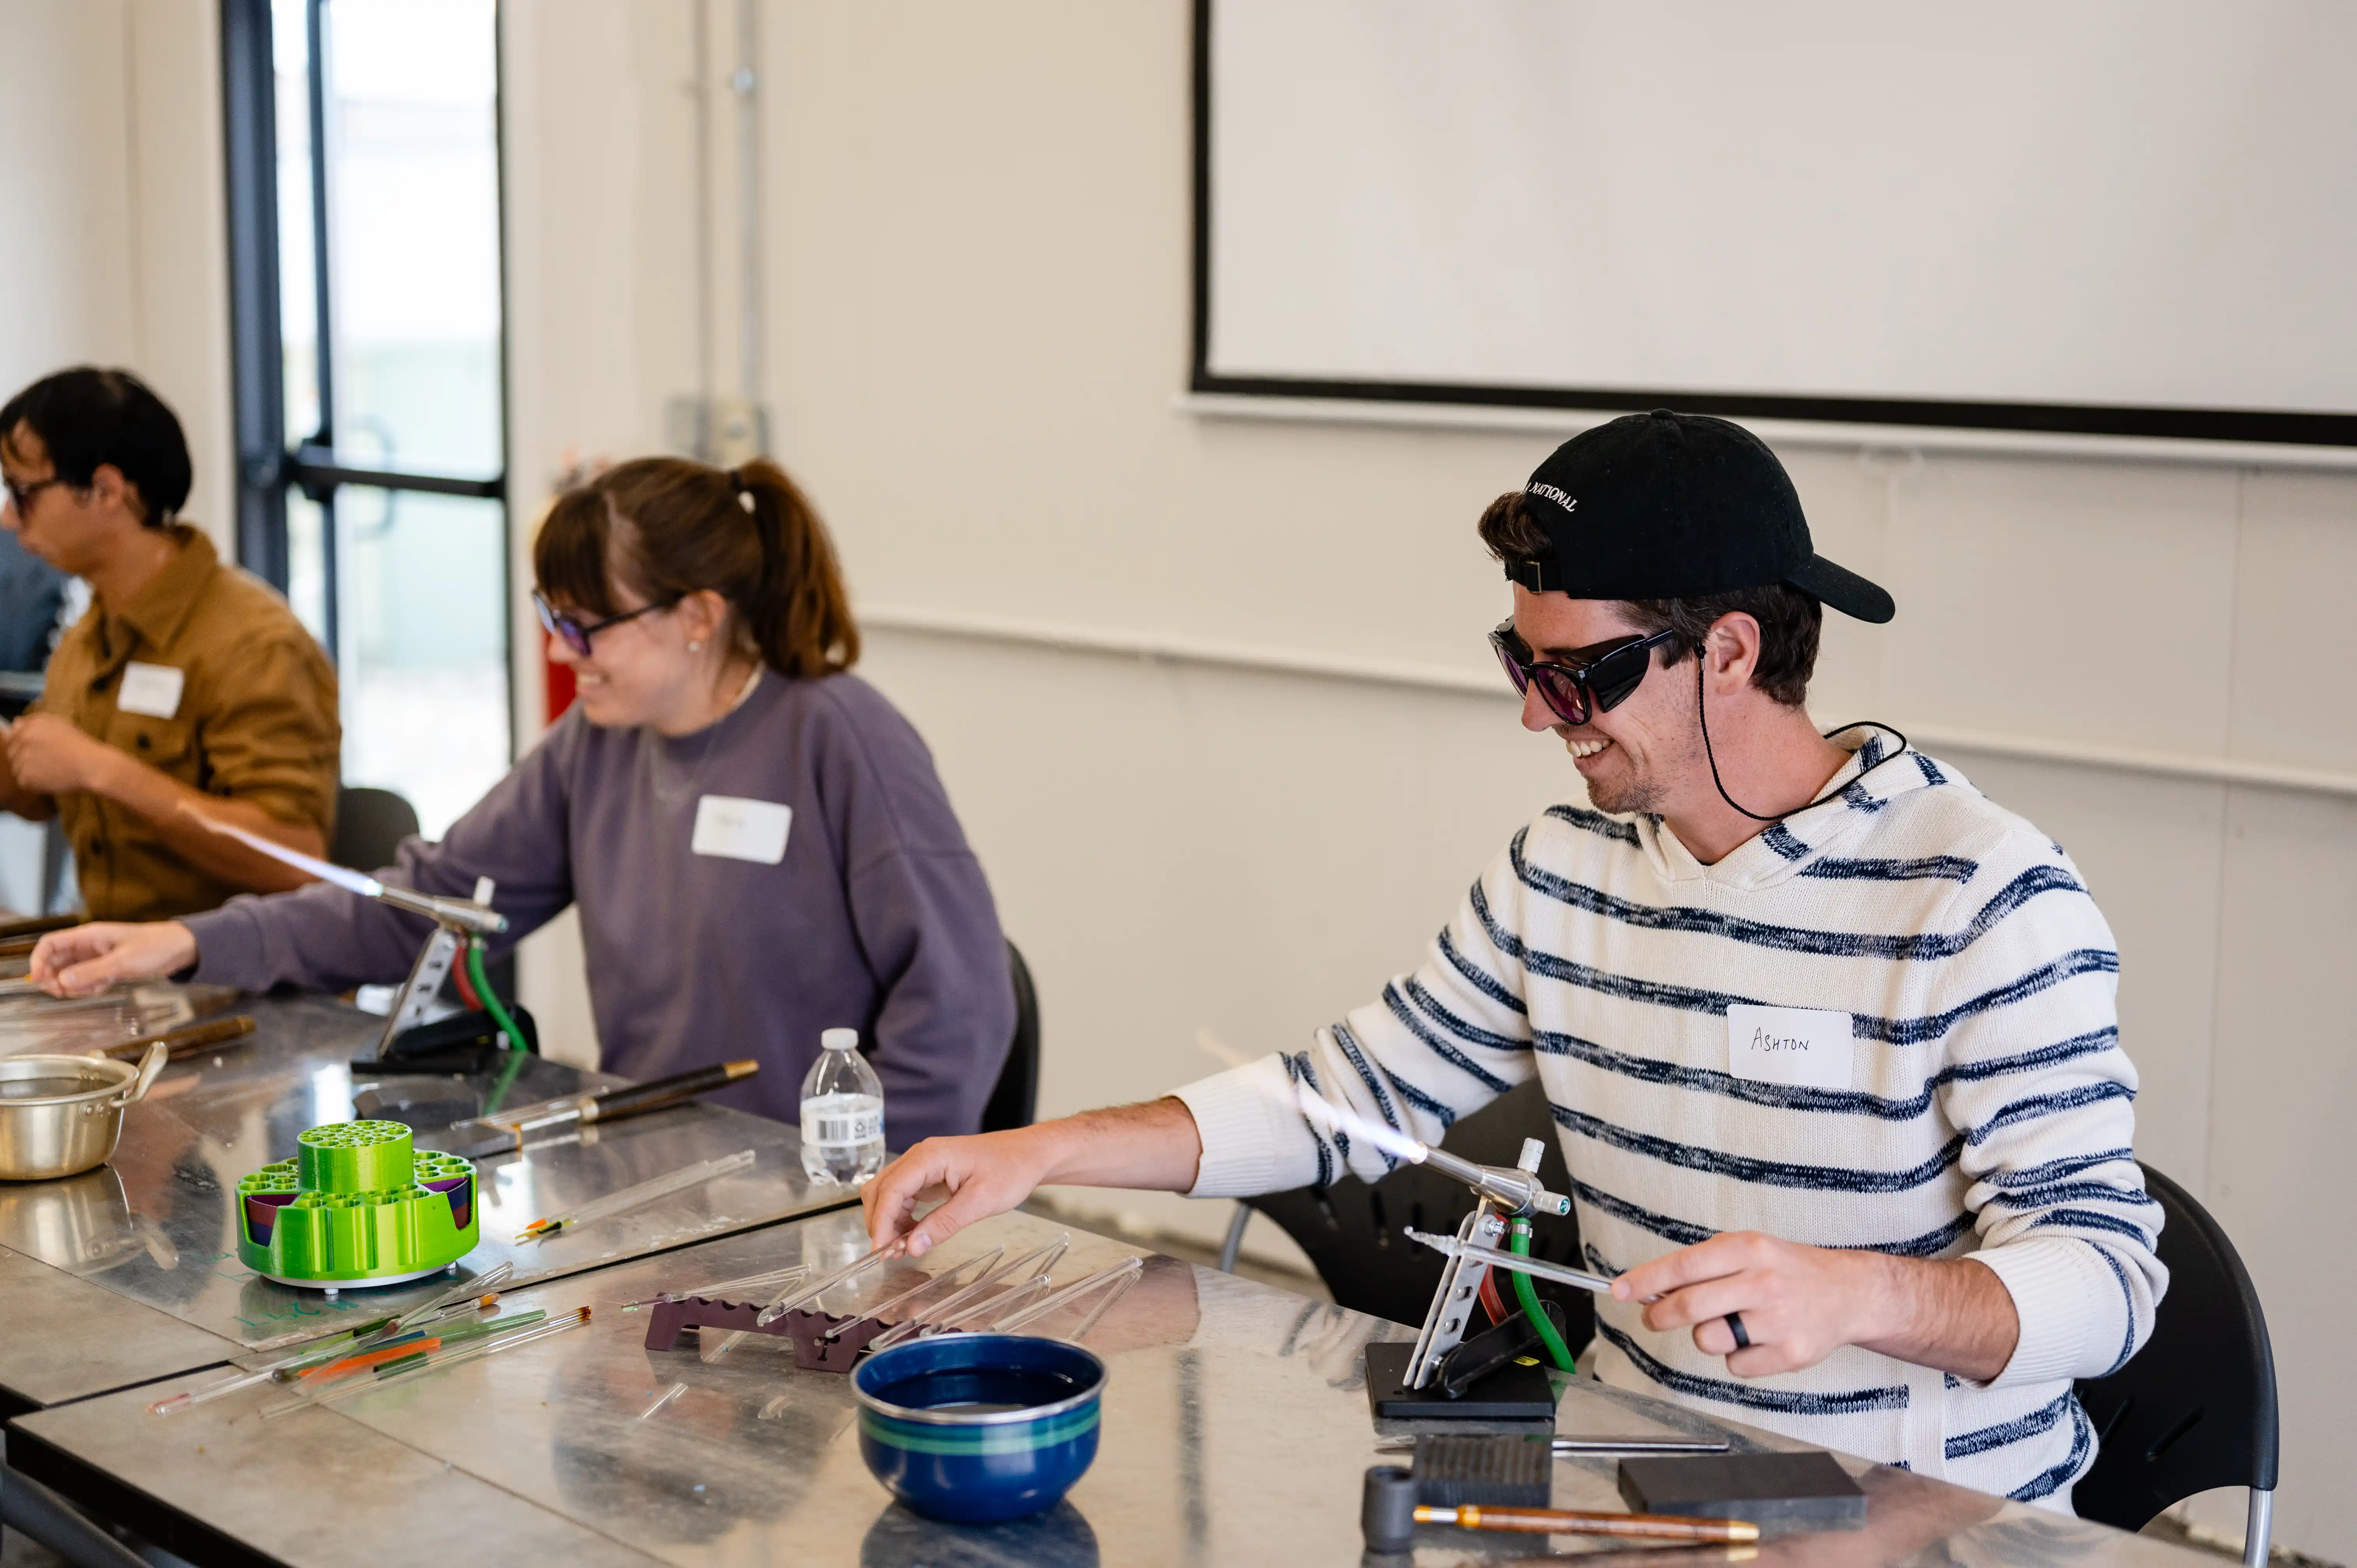 People engaging in a glassworking workshop, smiling as they manipulate various tools and colored glass rods at a well-lit table.